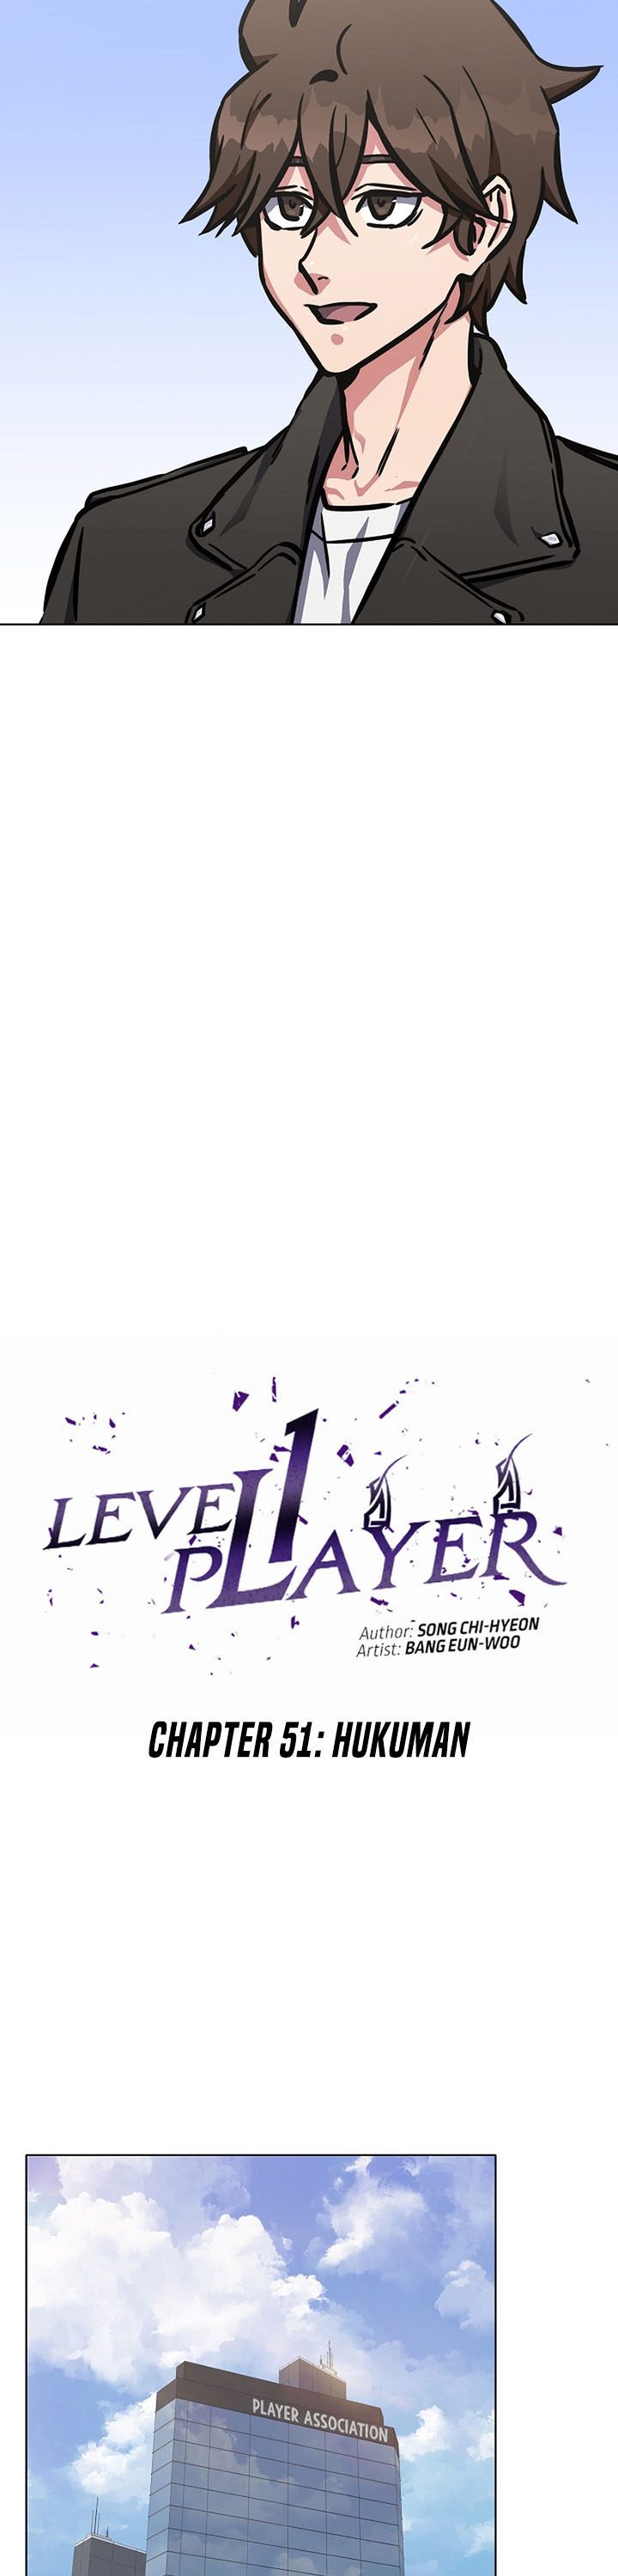 Level 1 Player Chapter 51